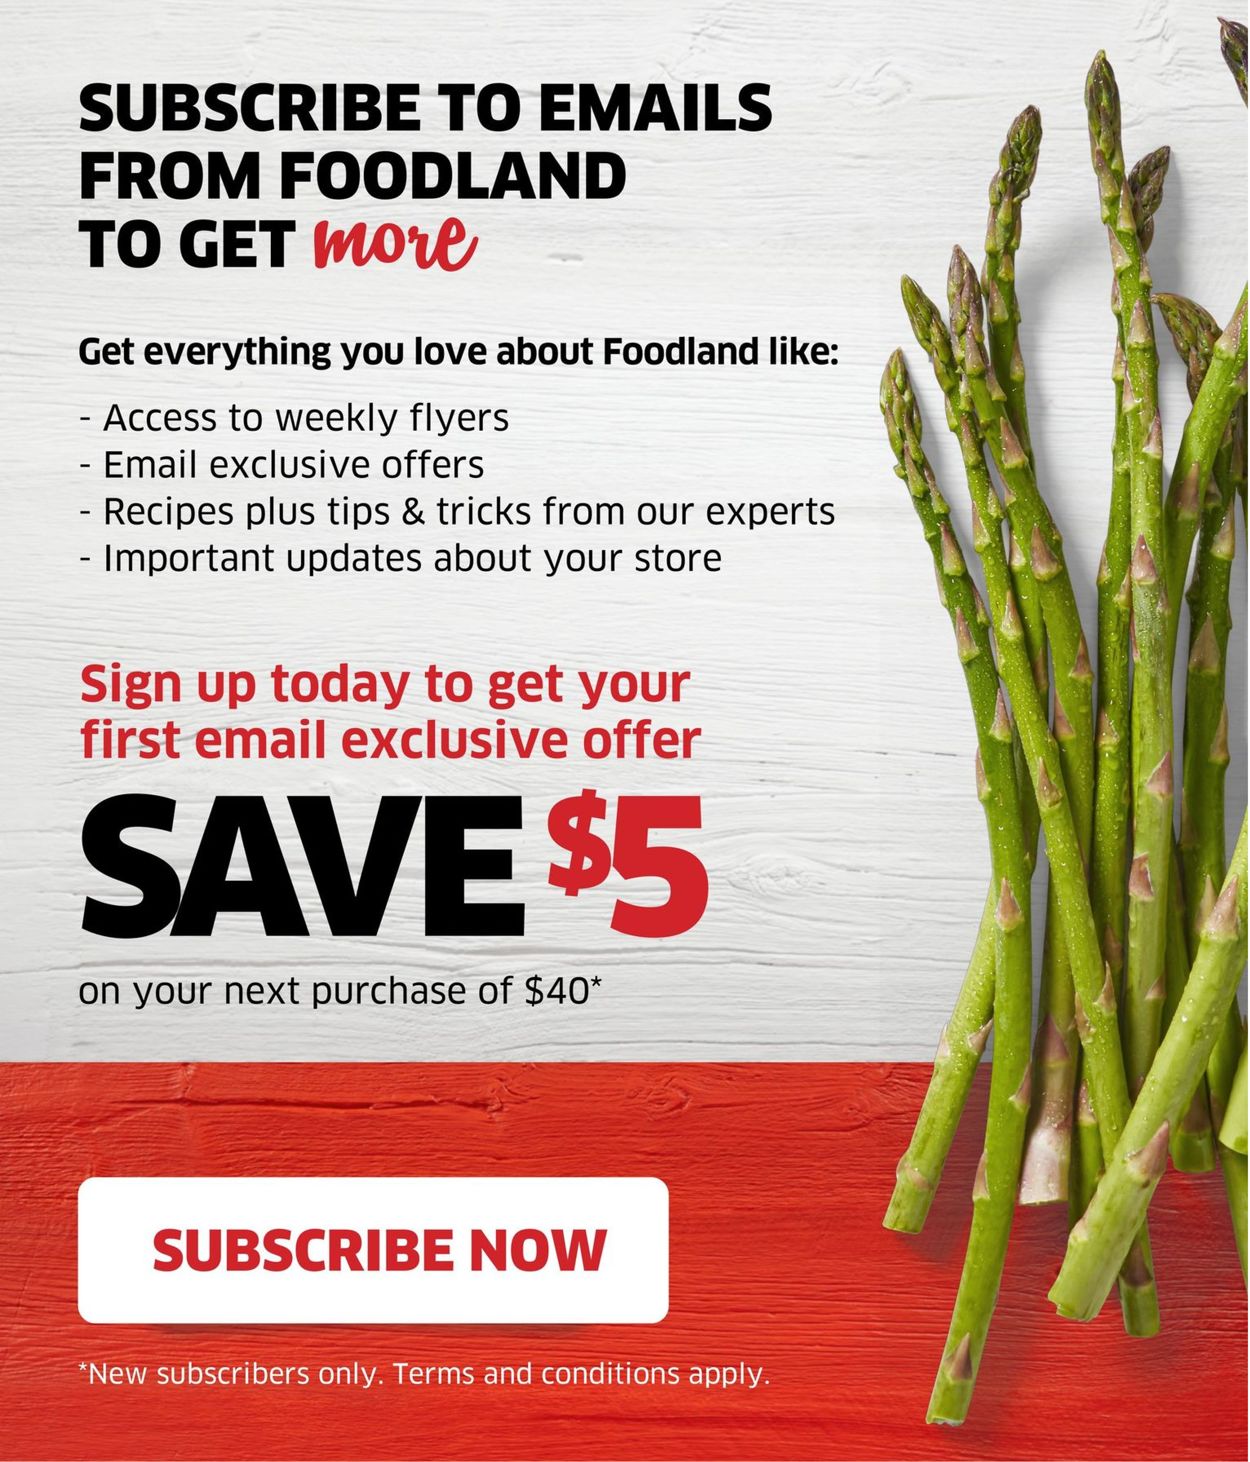 Foodland Flyer from 07/07/2022